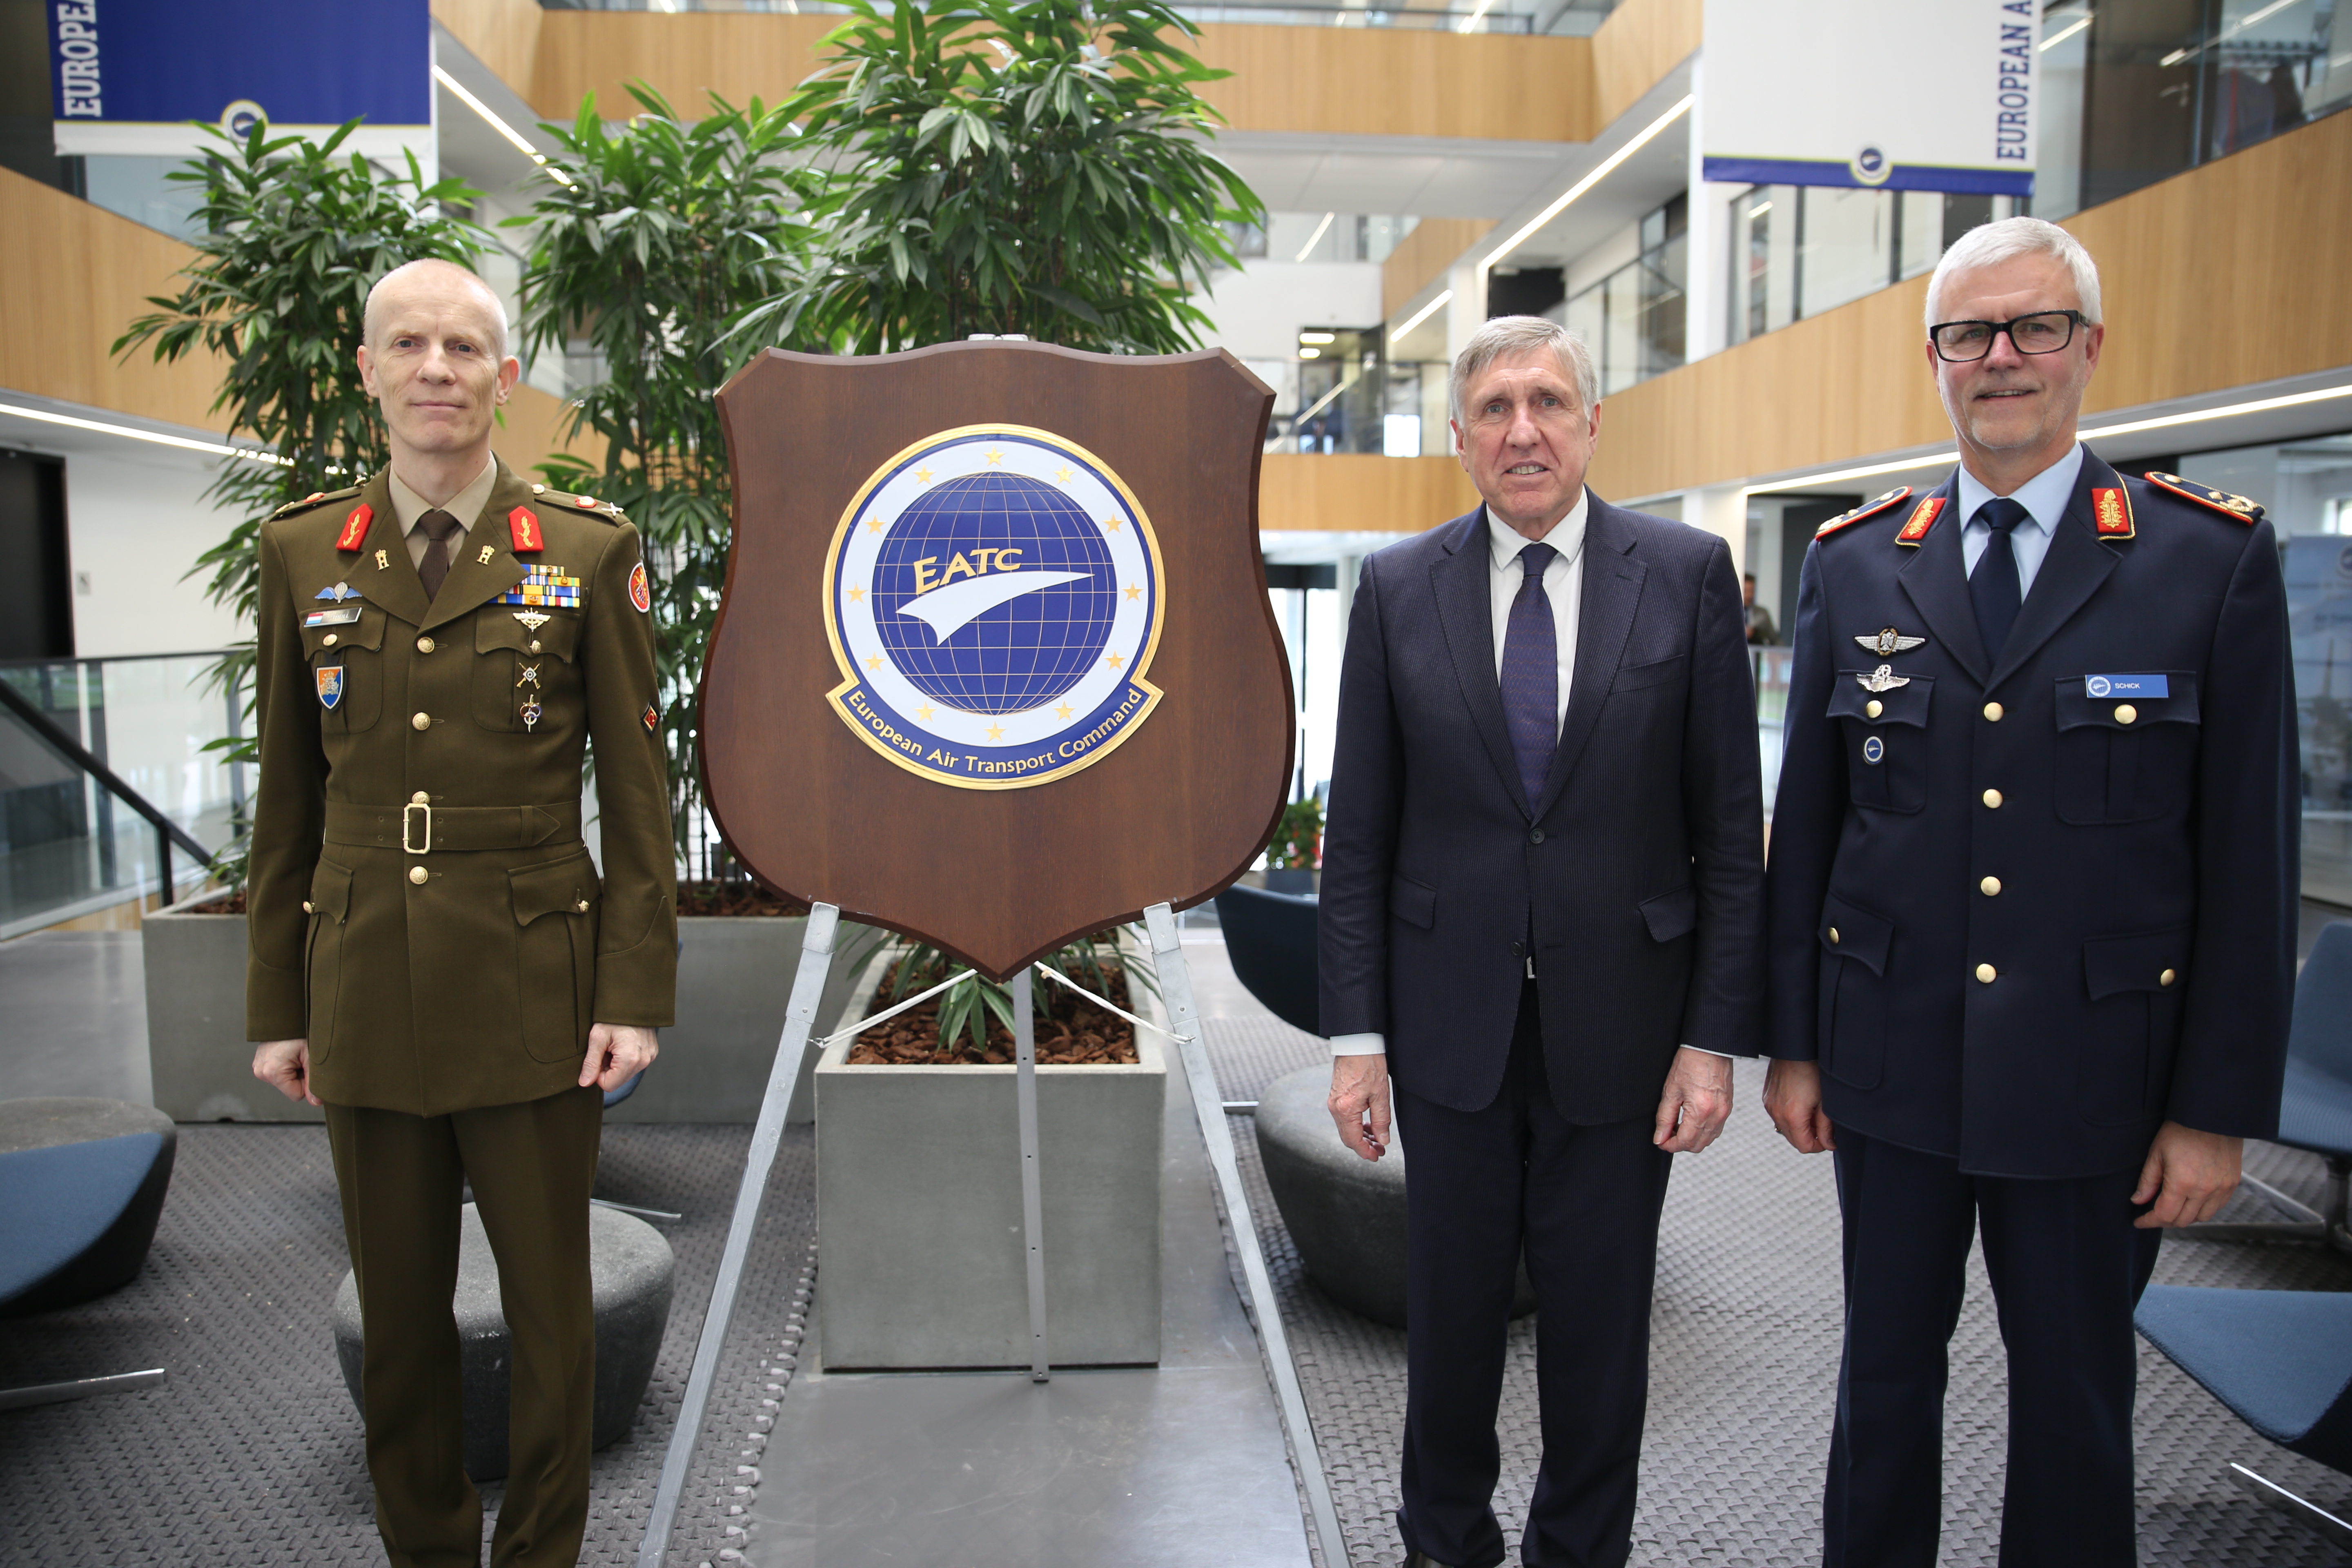 The Luxembourg Minister of Defence and Chief of Defence at EATC